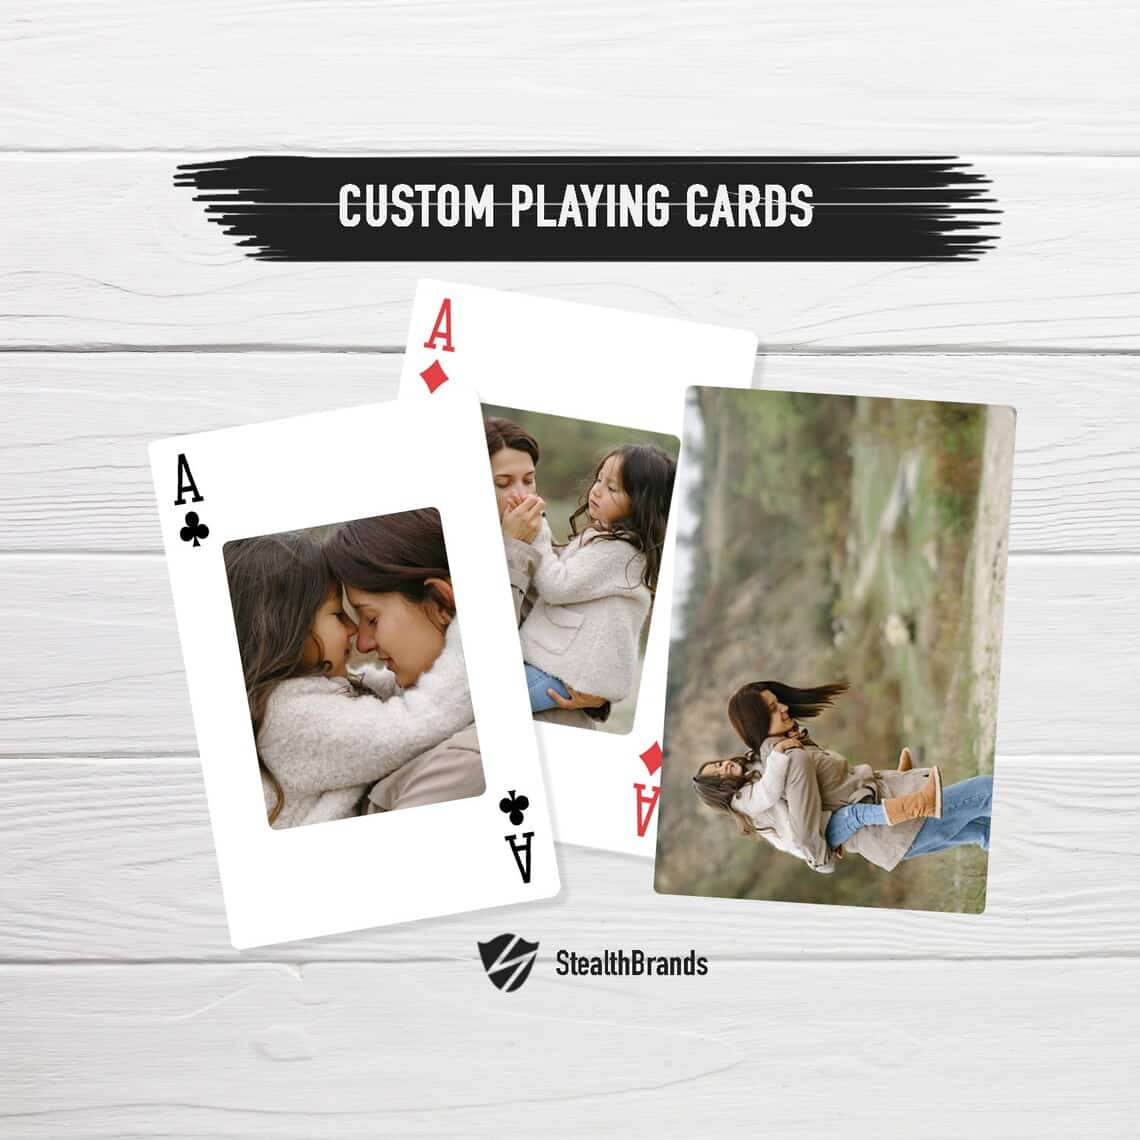 Custom playing cards that can be personalized with your family photos